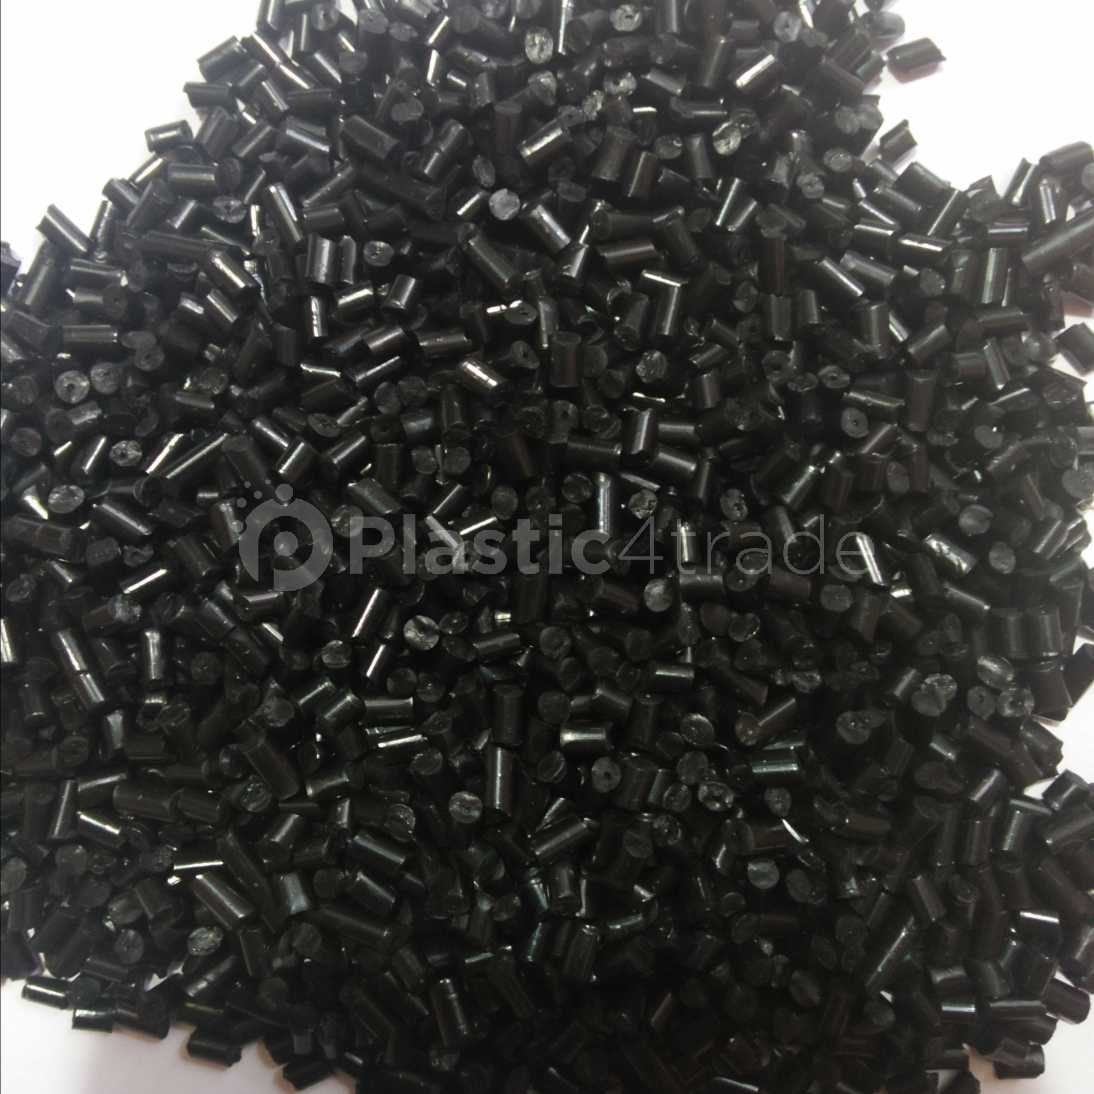 ABS GRANULES ABS Reprocess Granule Injection Molding west bengal india Plastic4trade